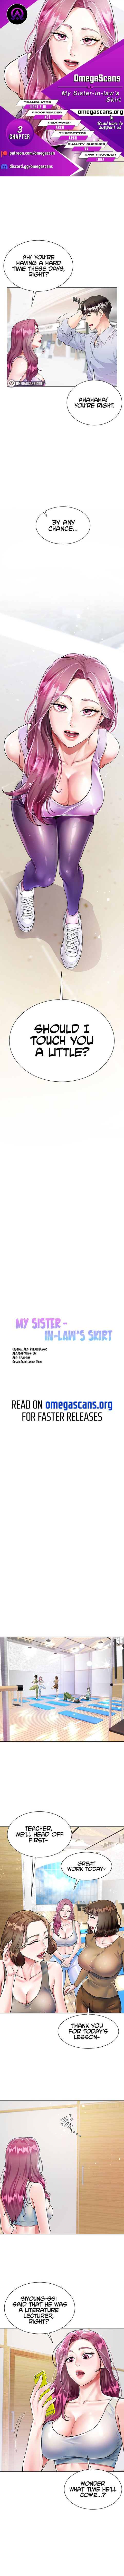 my-sister-in-laws-skirt-chap-3-0